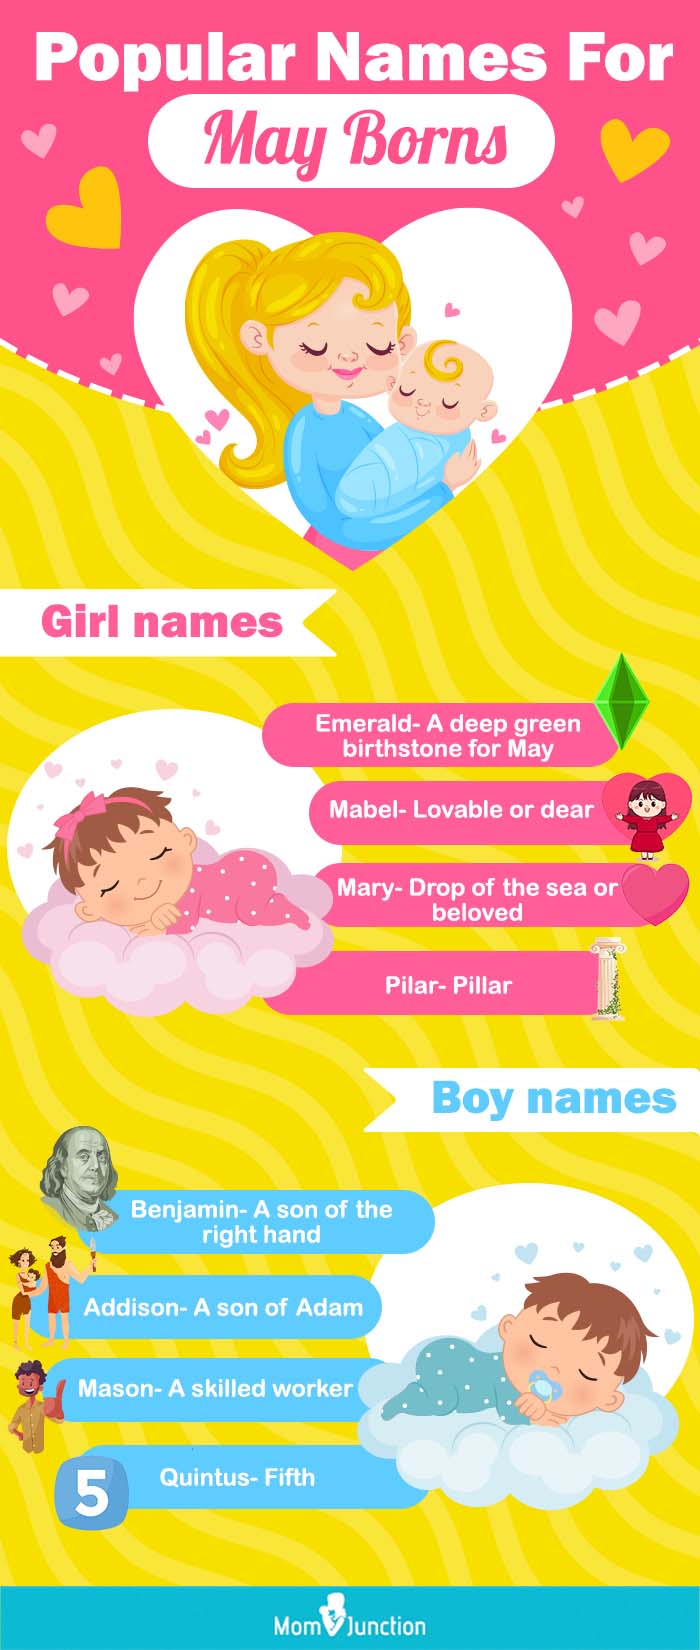 popular names for may borns (infographic)